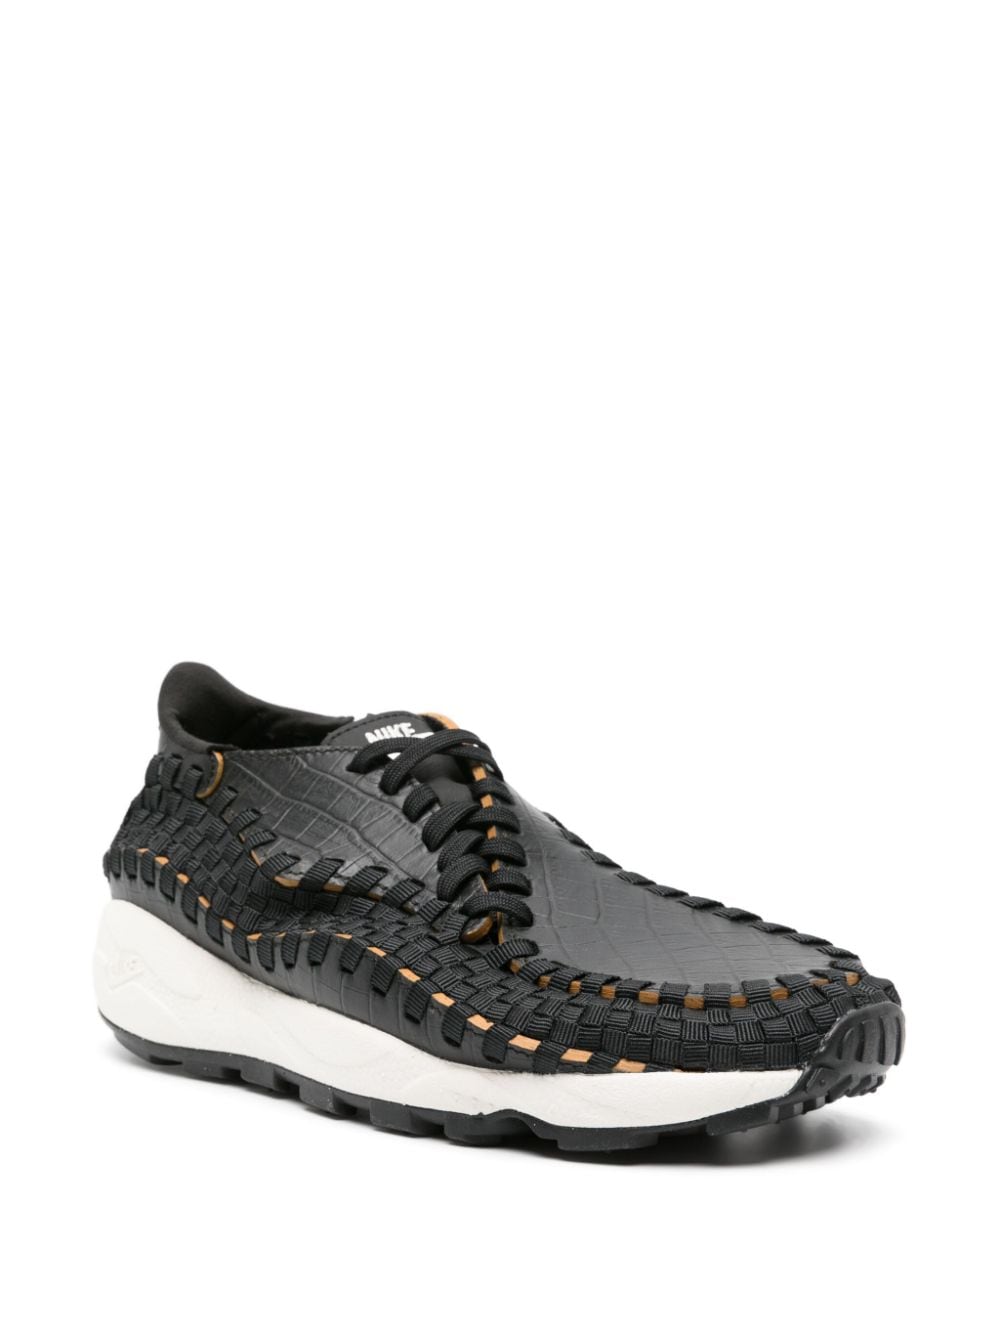 Nike Air Footscape Woven leather sneakers - Zwart